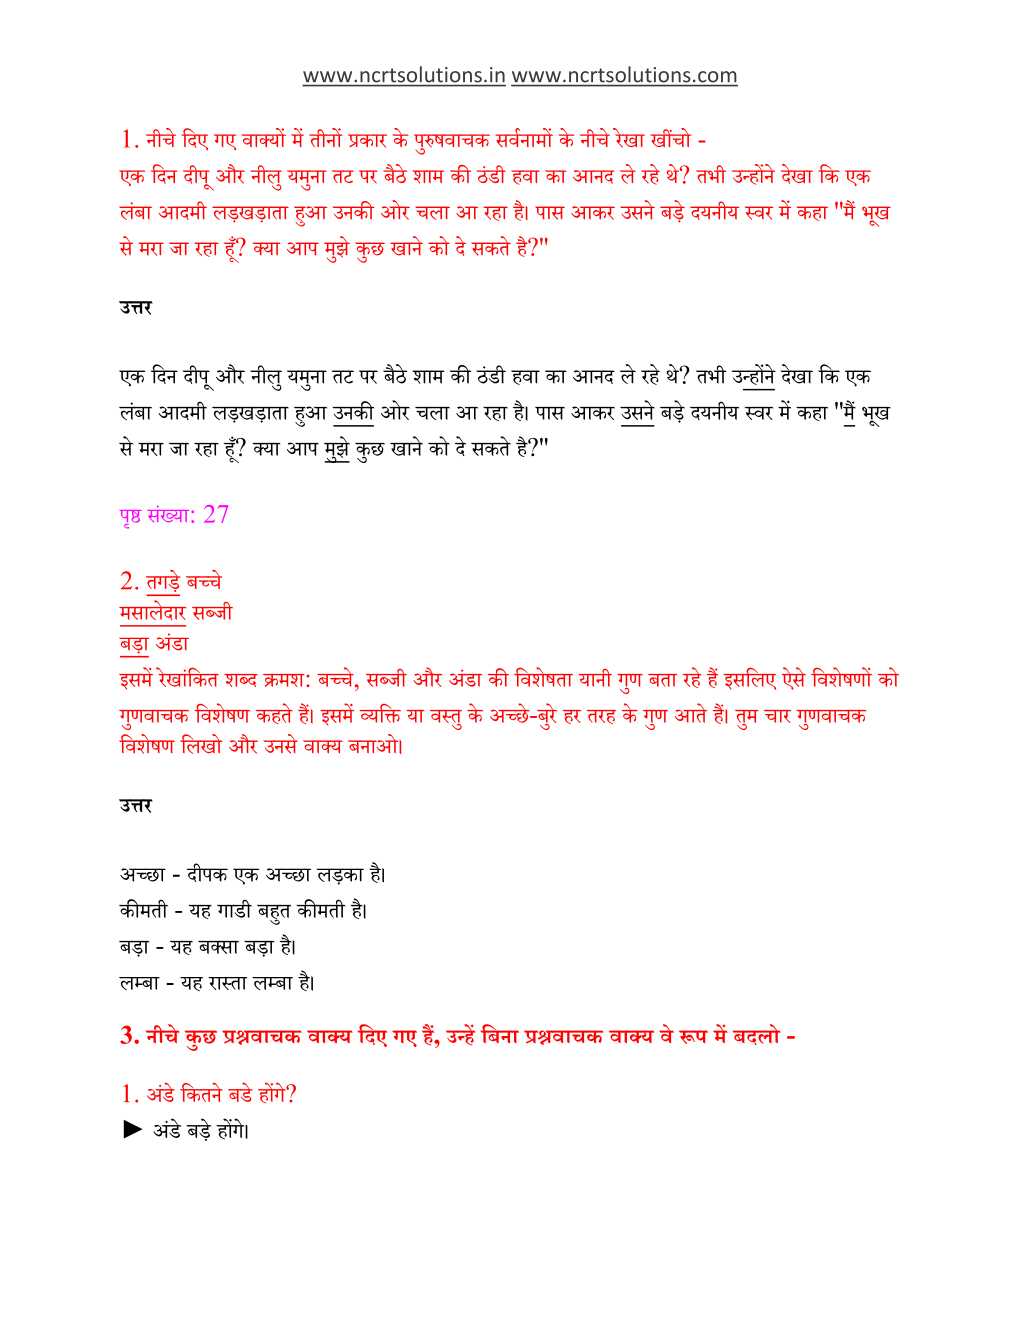 NCERT Solutions For Class 6 Hindi Vasant Chapter 3